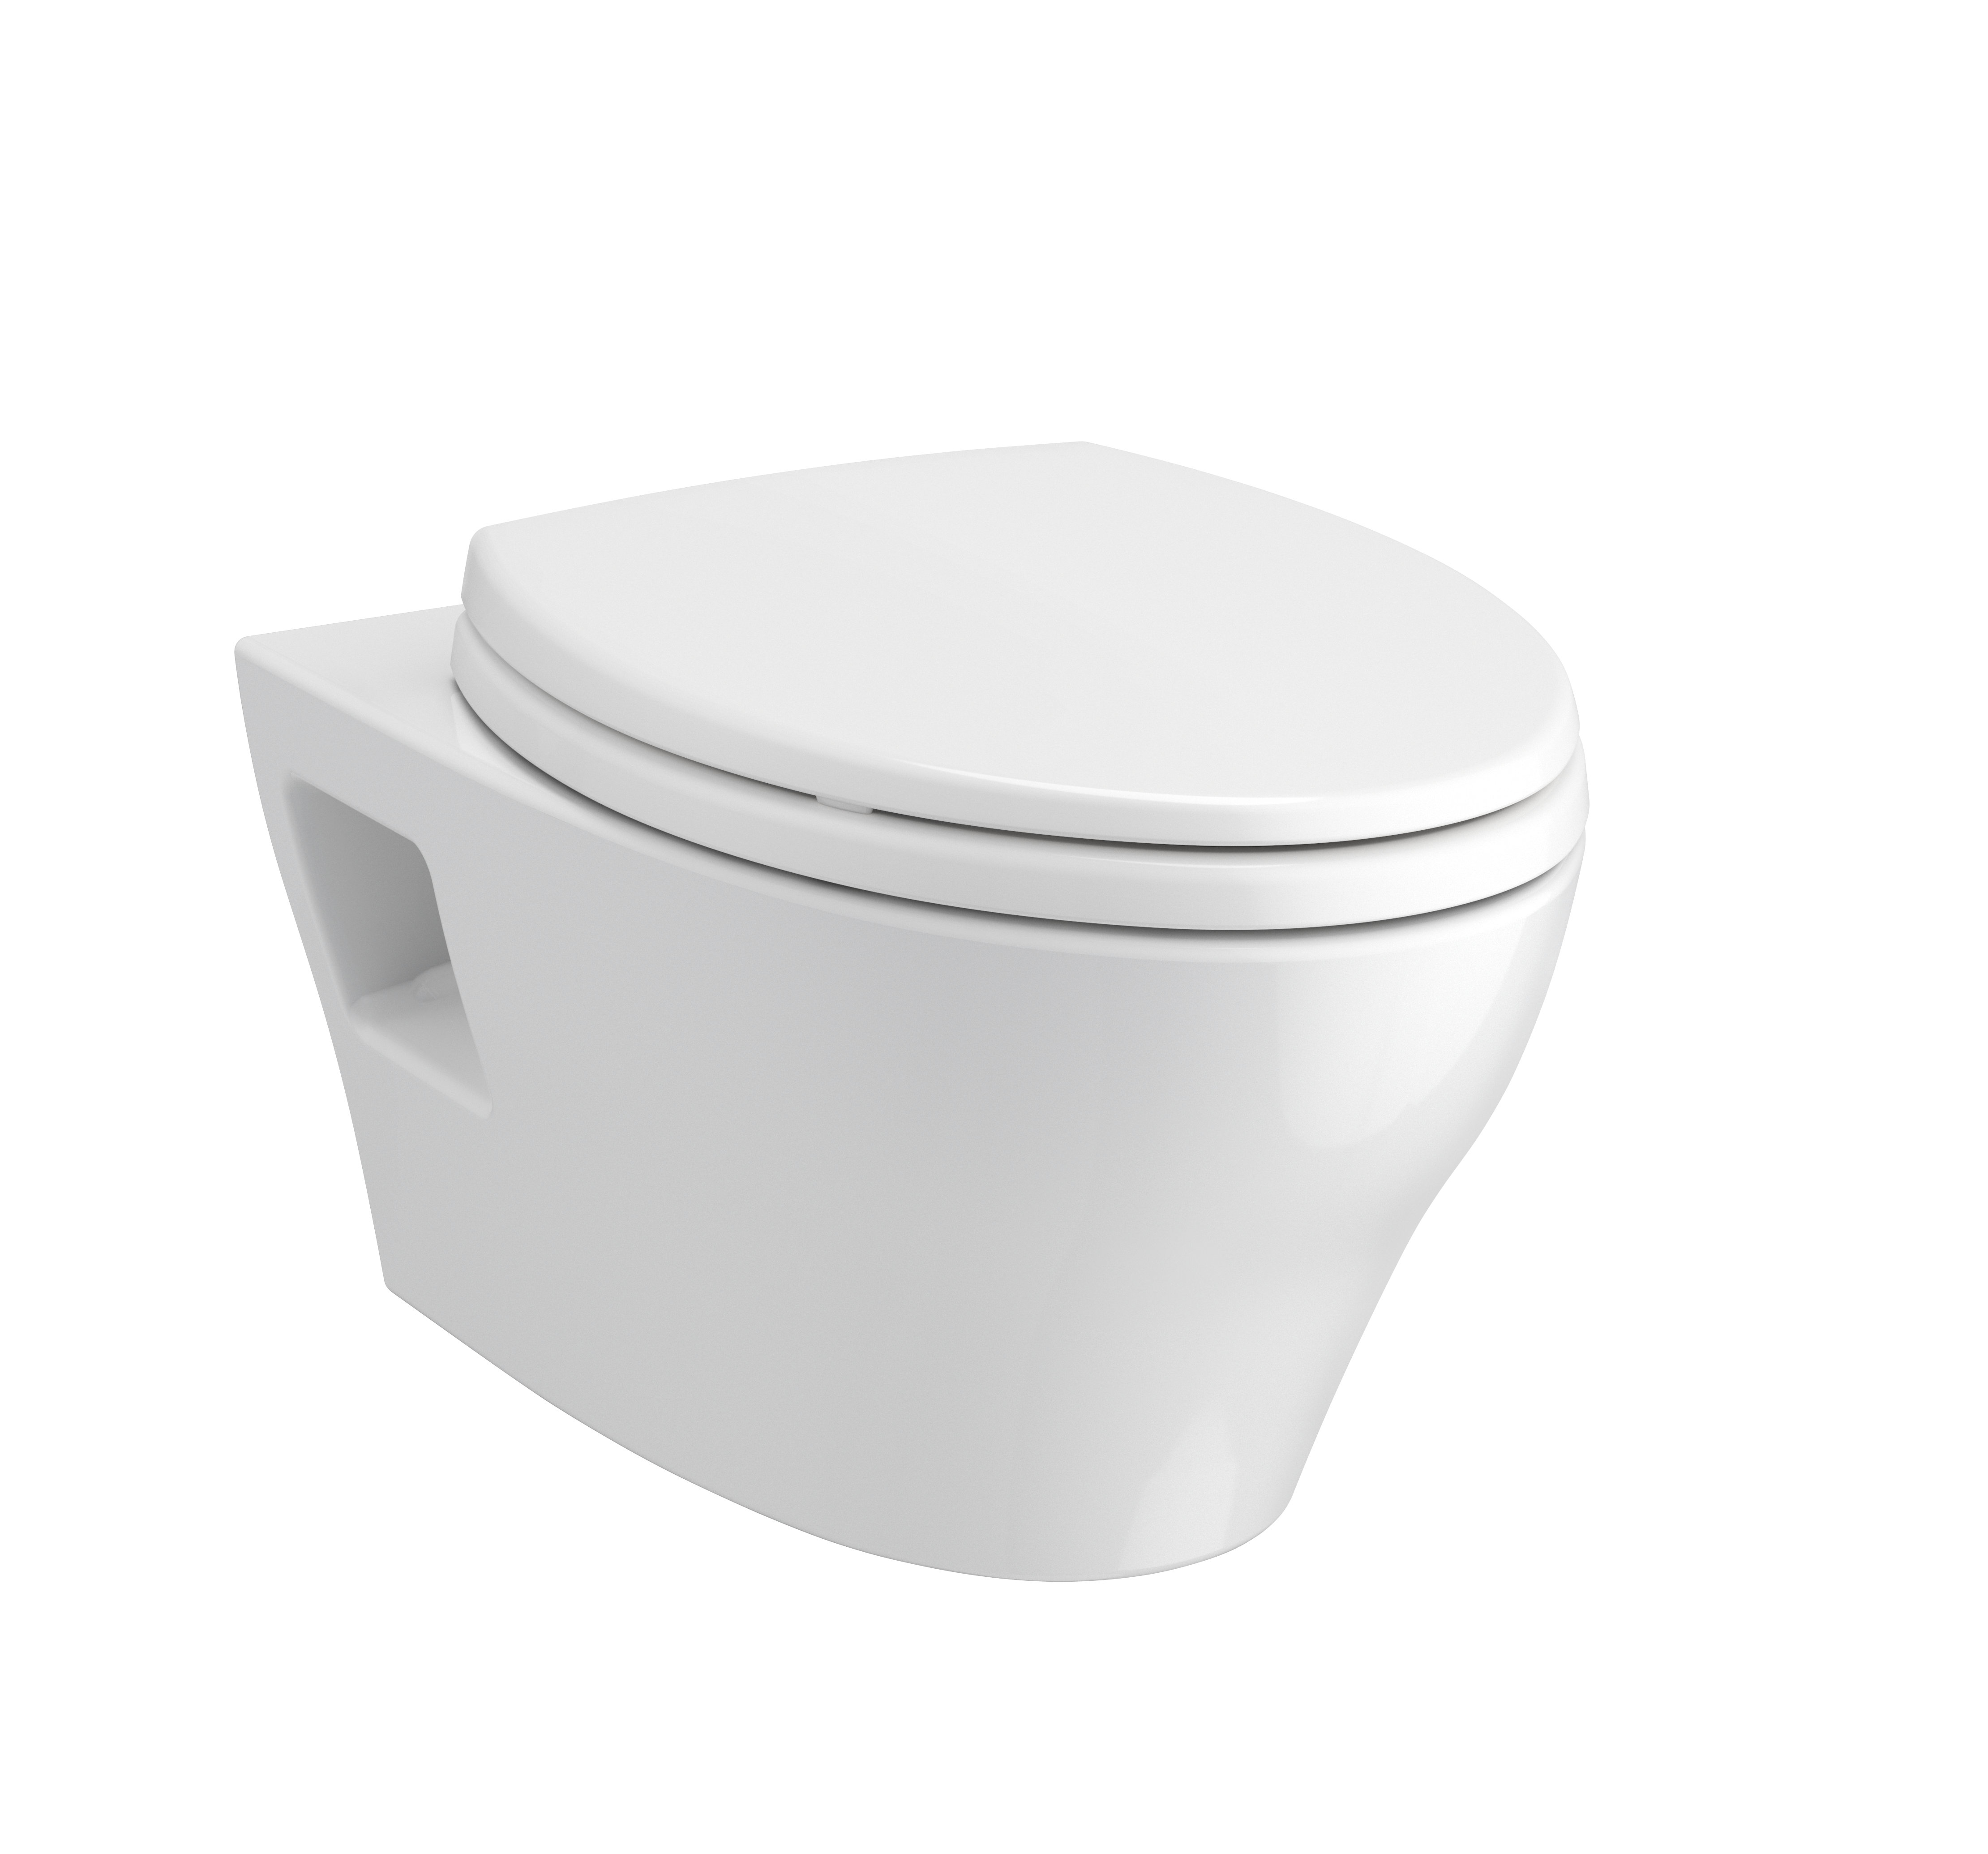 Square Wall Hung Mounted Toilet Bowl Size 22 L x 14.5 W x 16 Inches H 